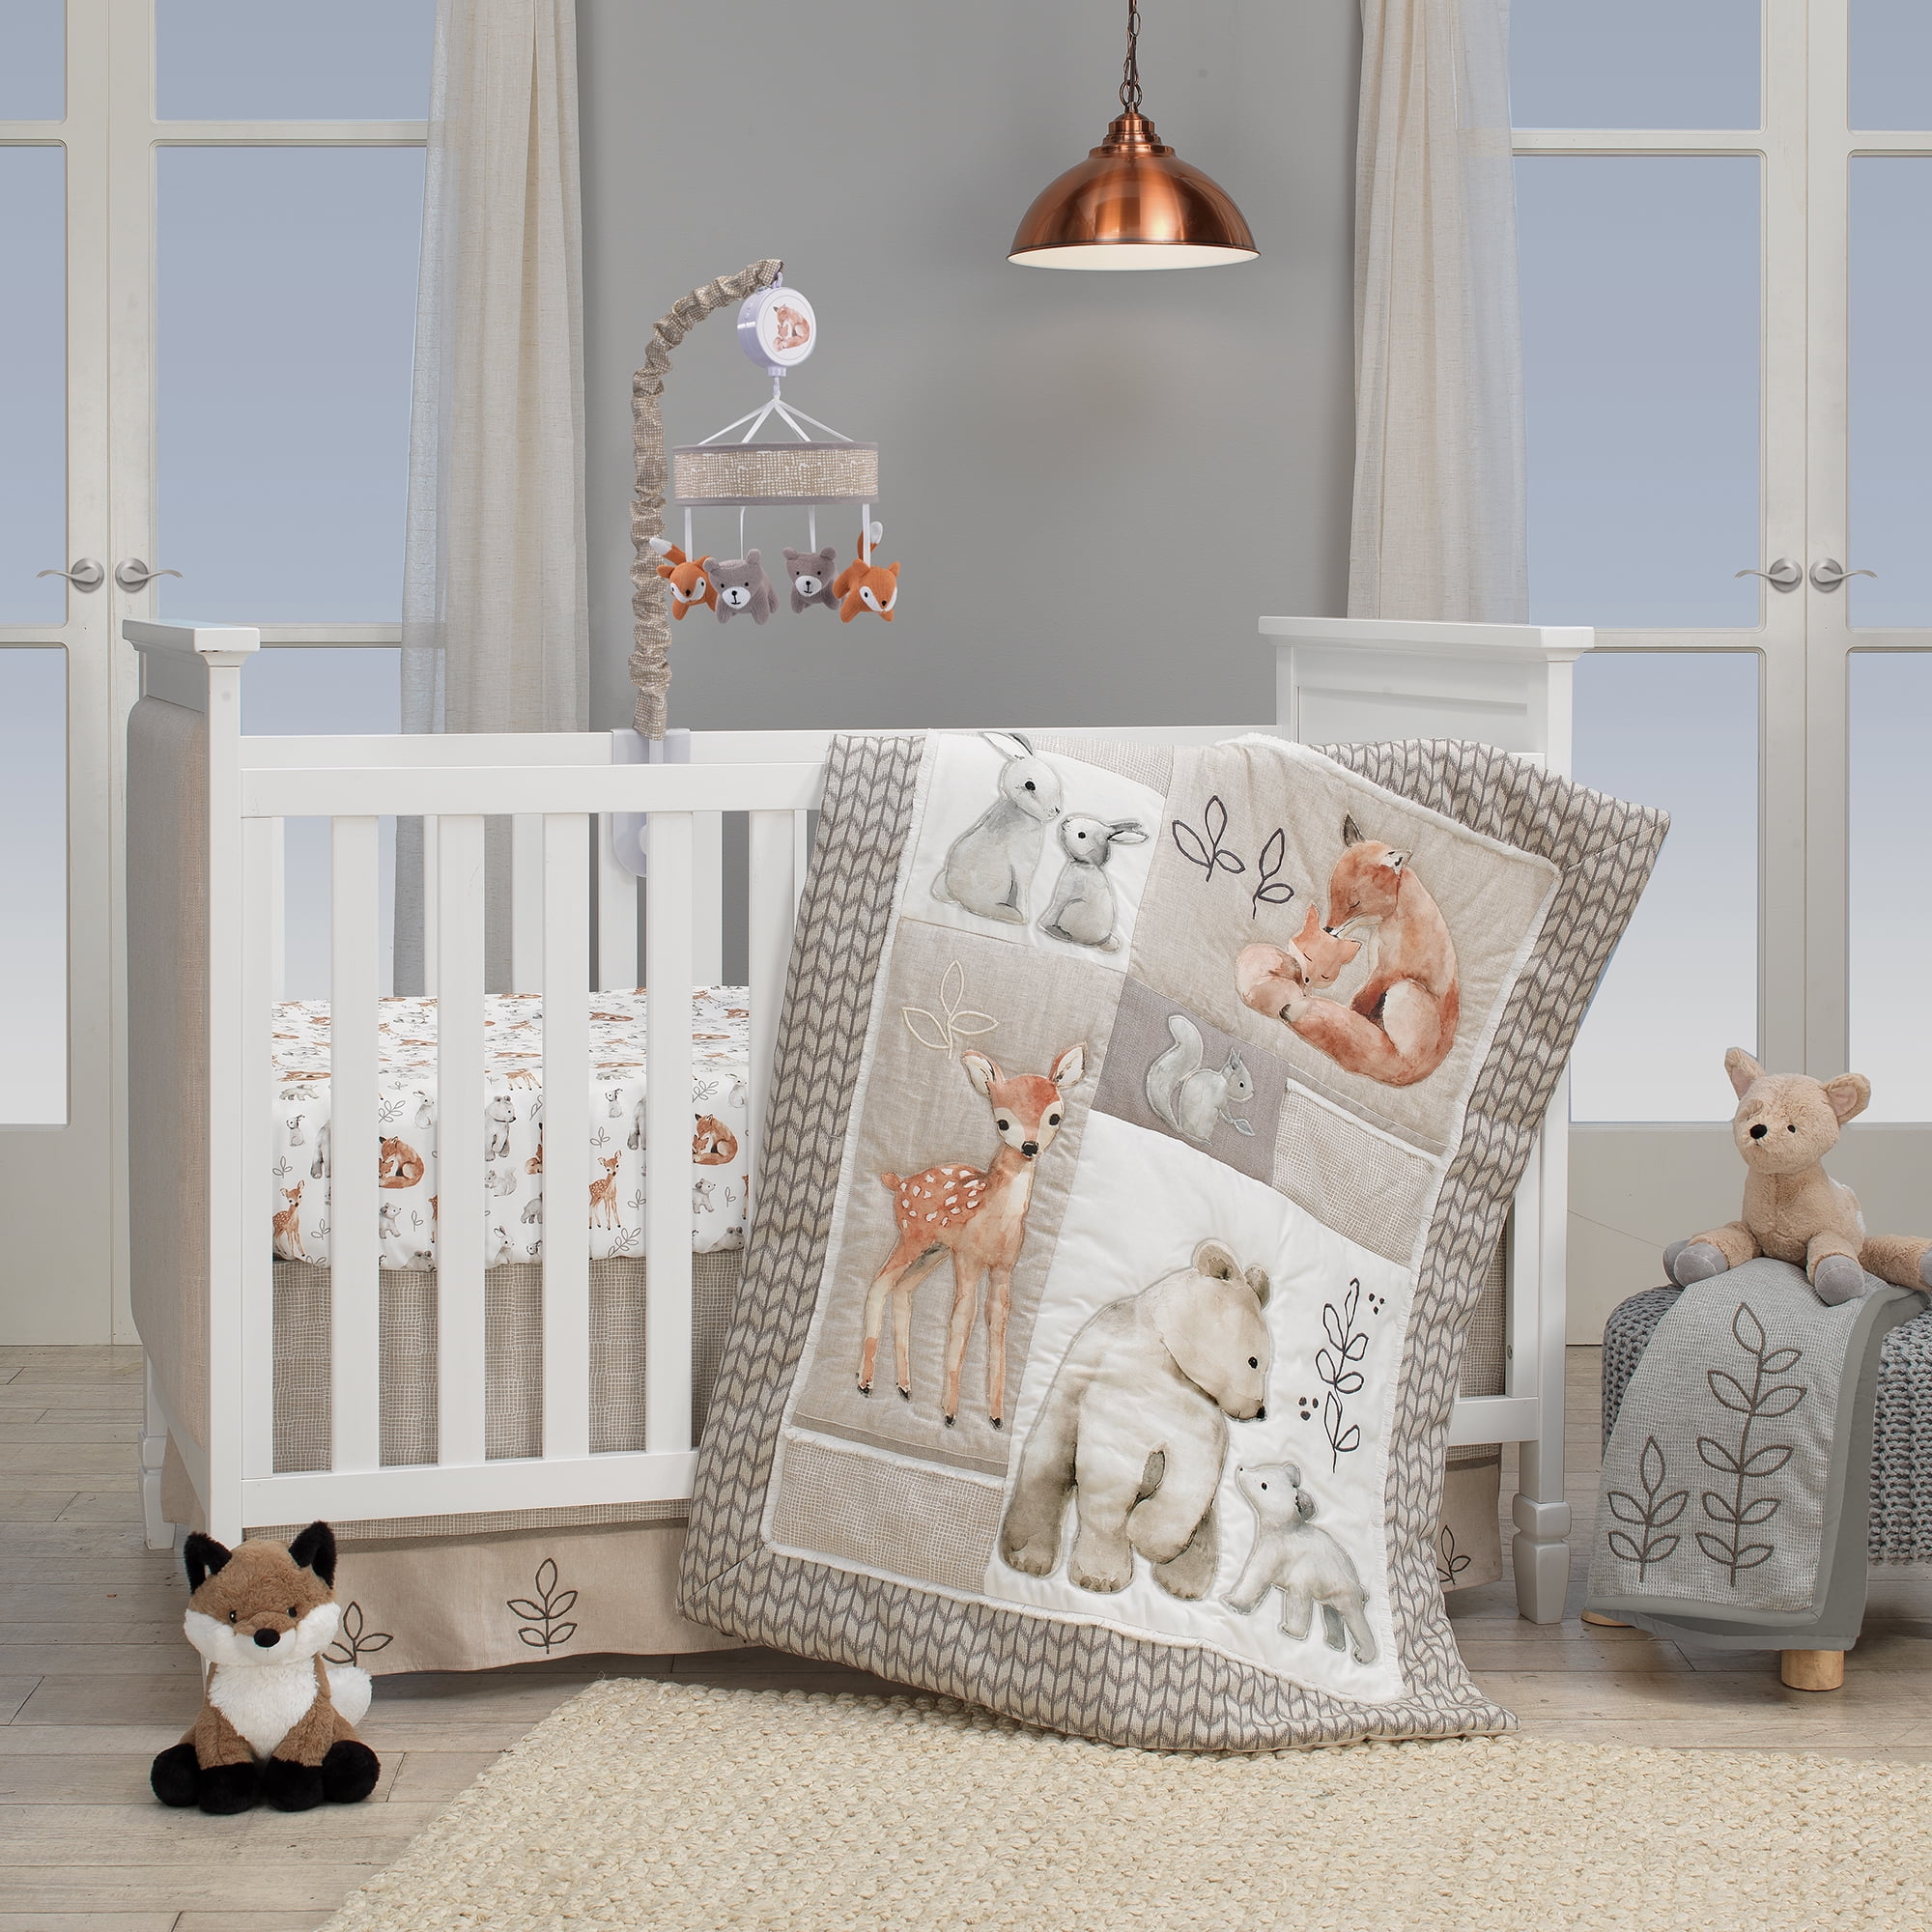 Lambs & Ivy Painted Forest 4-Piece Crib Bedding Set - Gray, Beige ...